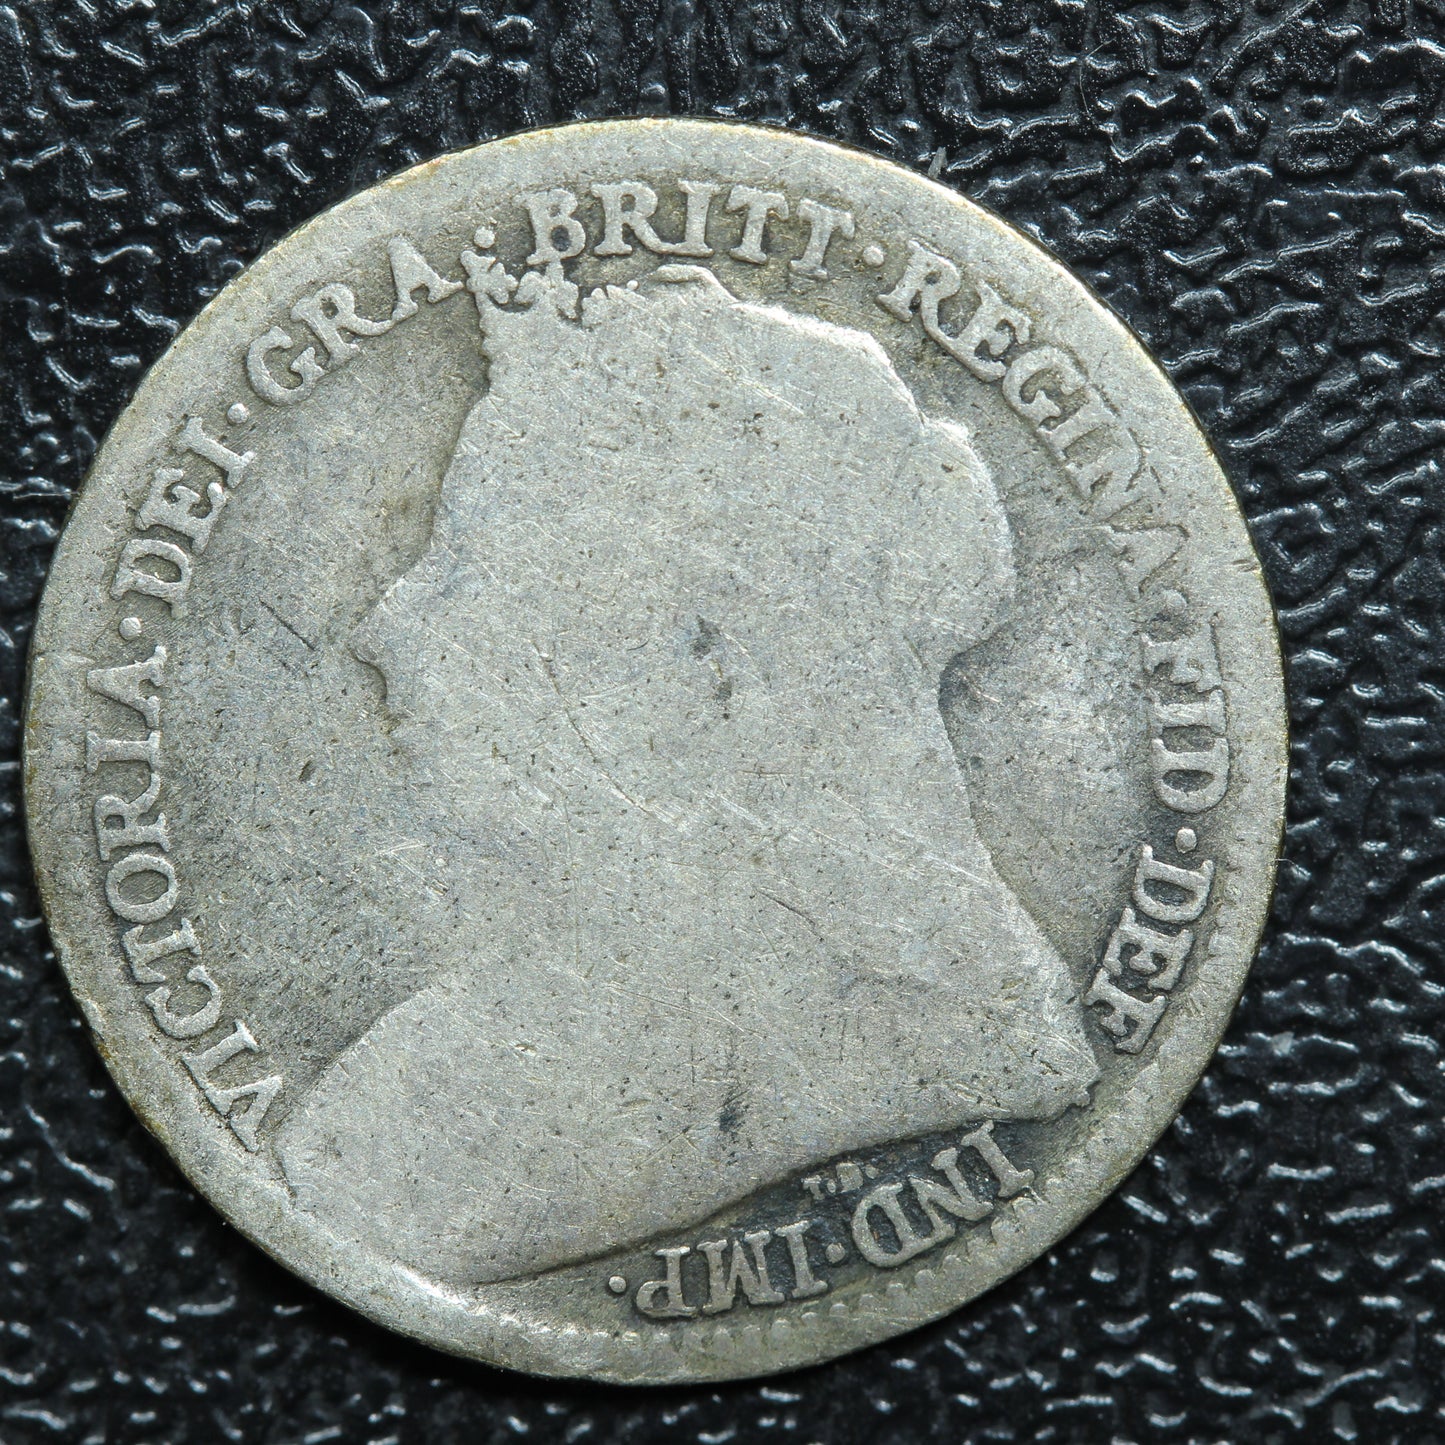 1897 Great Britain 3 Pence Threepence Silver Coin - KM# 777